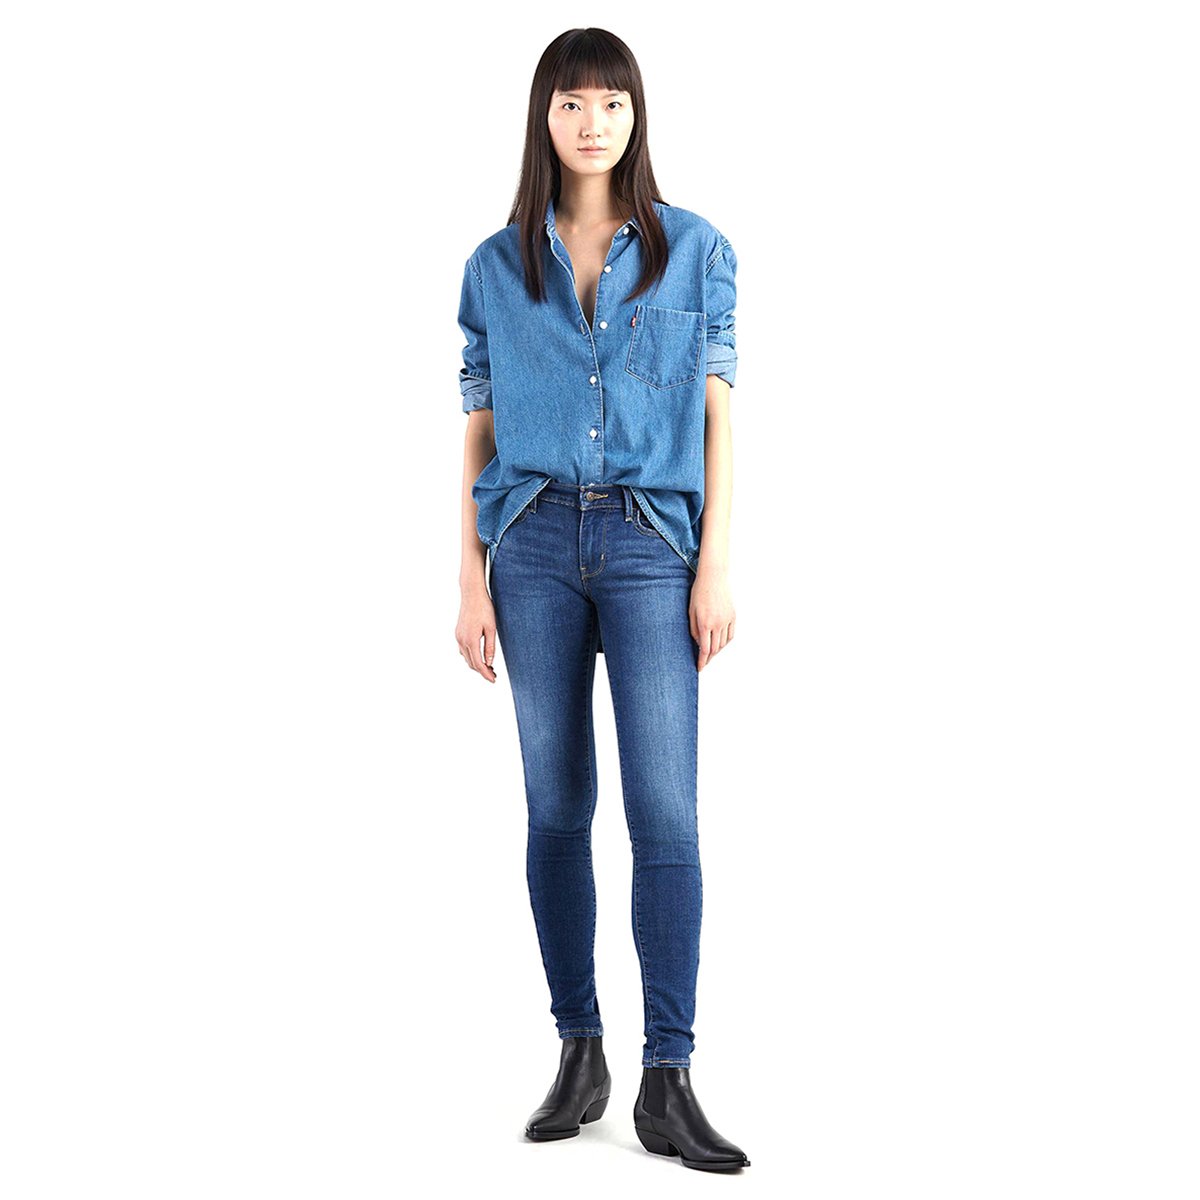 Jeans 710 Super Skinny Levis para Mujer